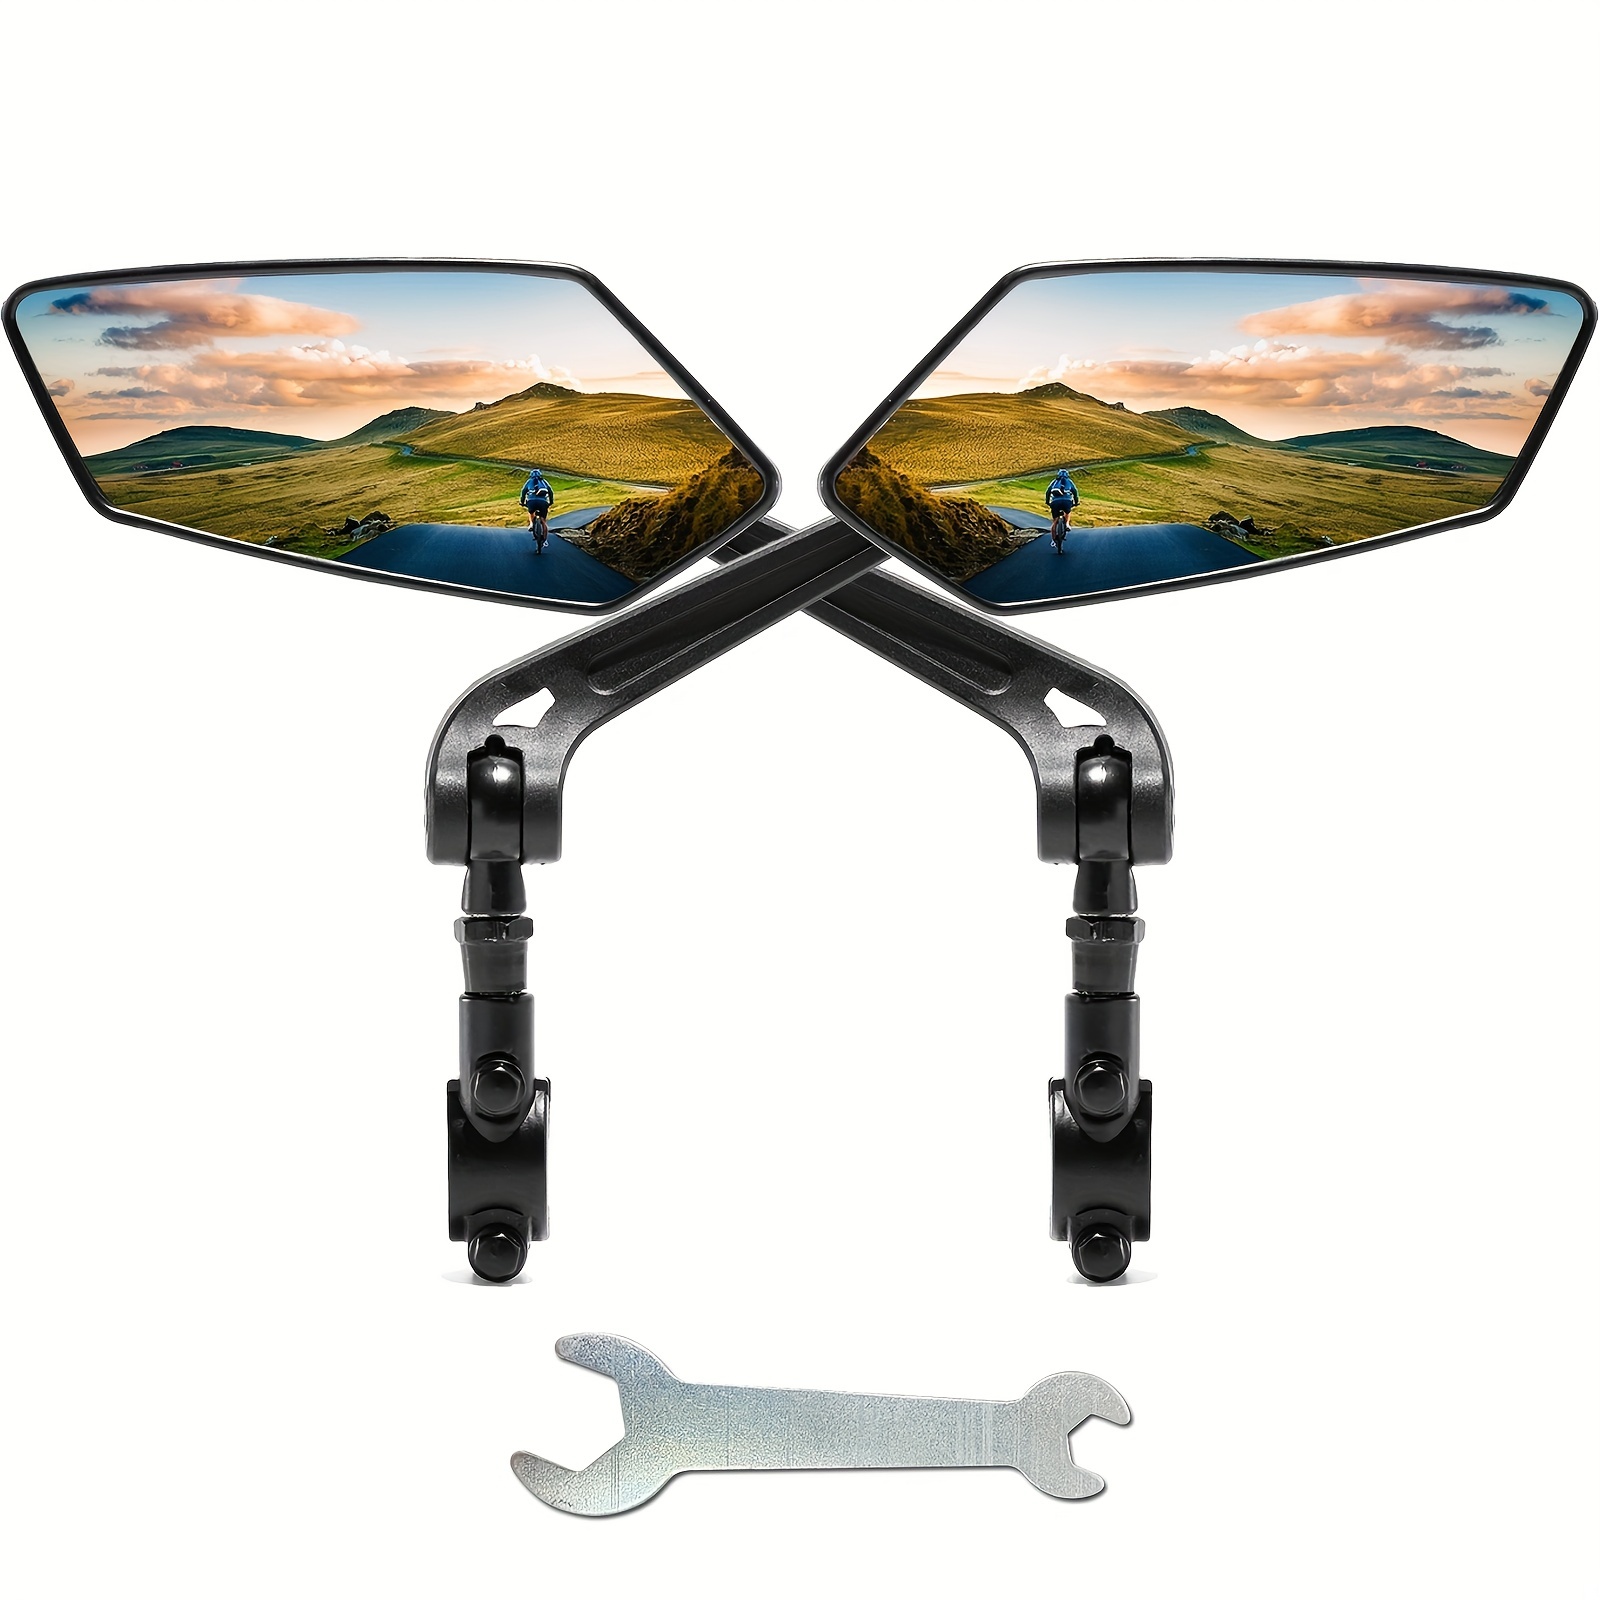 2pcs Bike Handlebar Mirrors For Bicycle Ebike Scooter Snowbike Adjuatable Wide Angle Rear View And 360° Rotatable Safety Galss Design